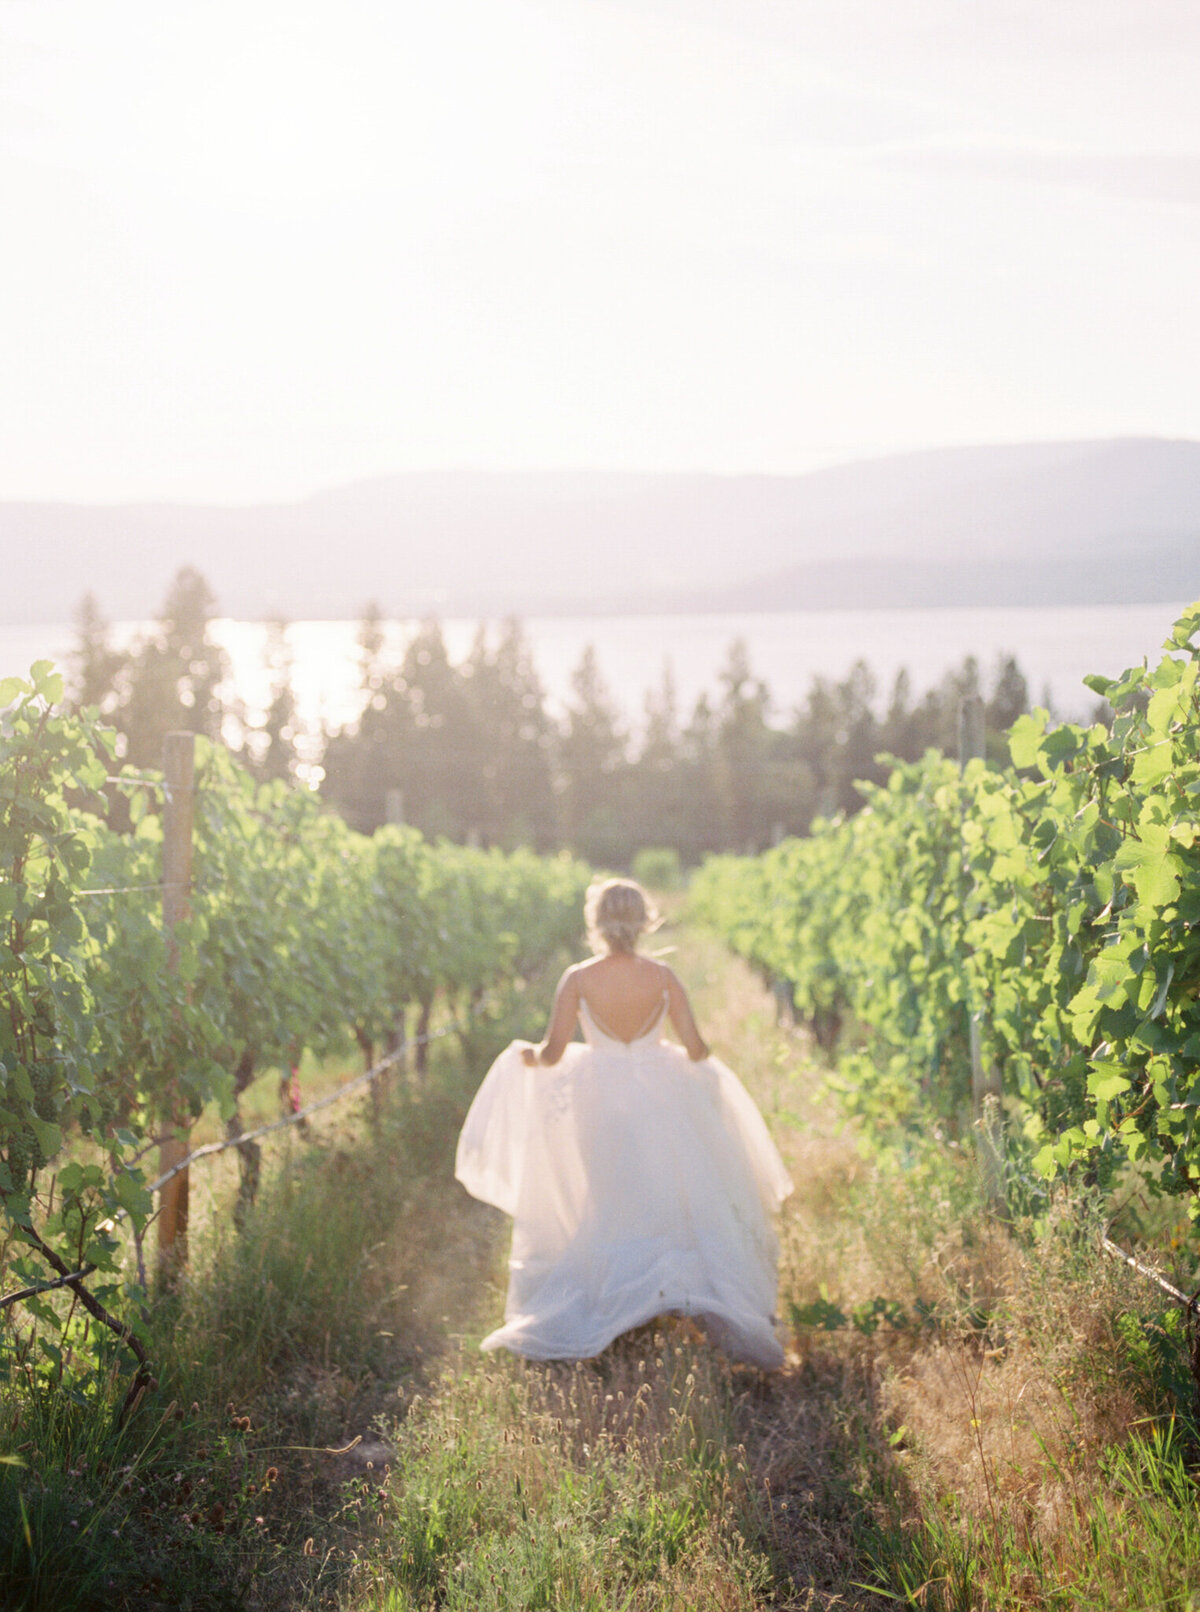 Bride running through rows of trees in wine country captured by Pam Kriangkum Photography, fine art, classic wedding photographer in Edmonton, Alberta. Featured on the Bronte Bride Vendor Guide.